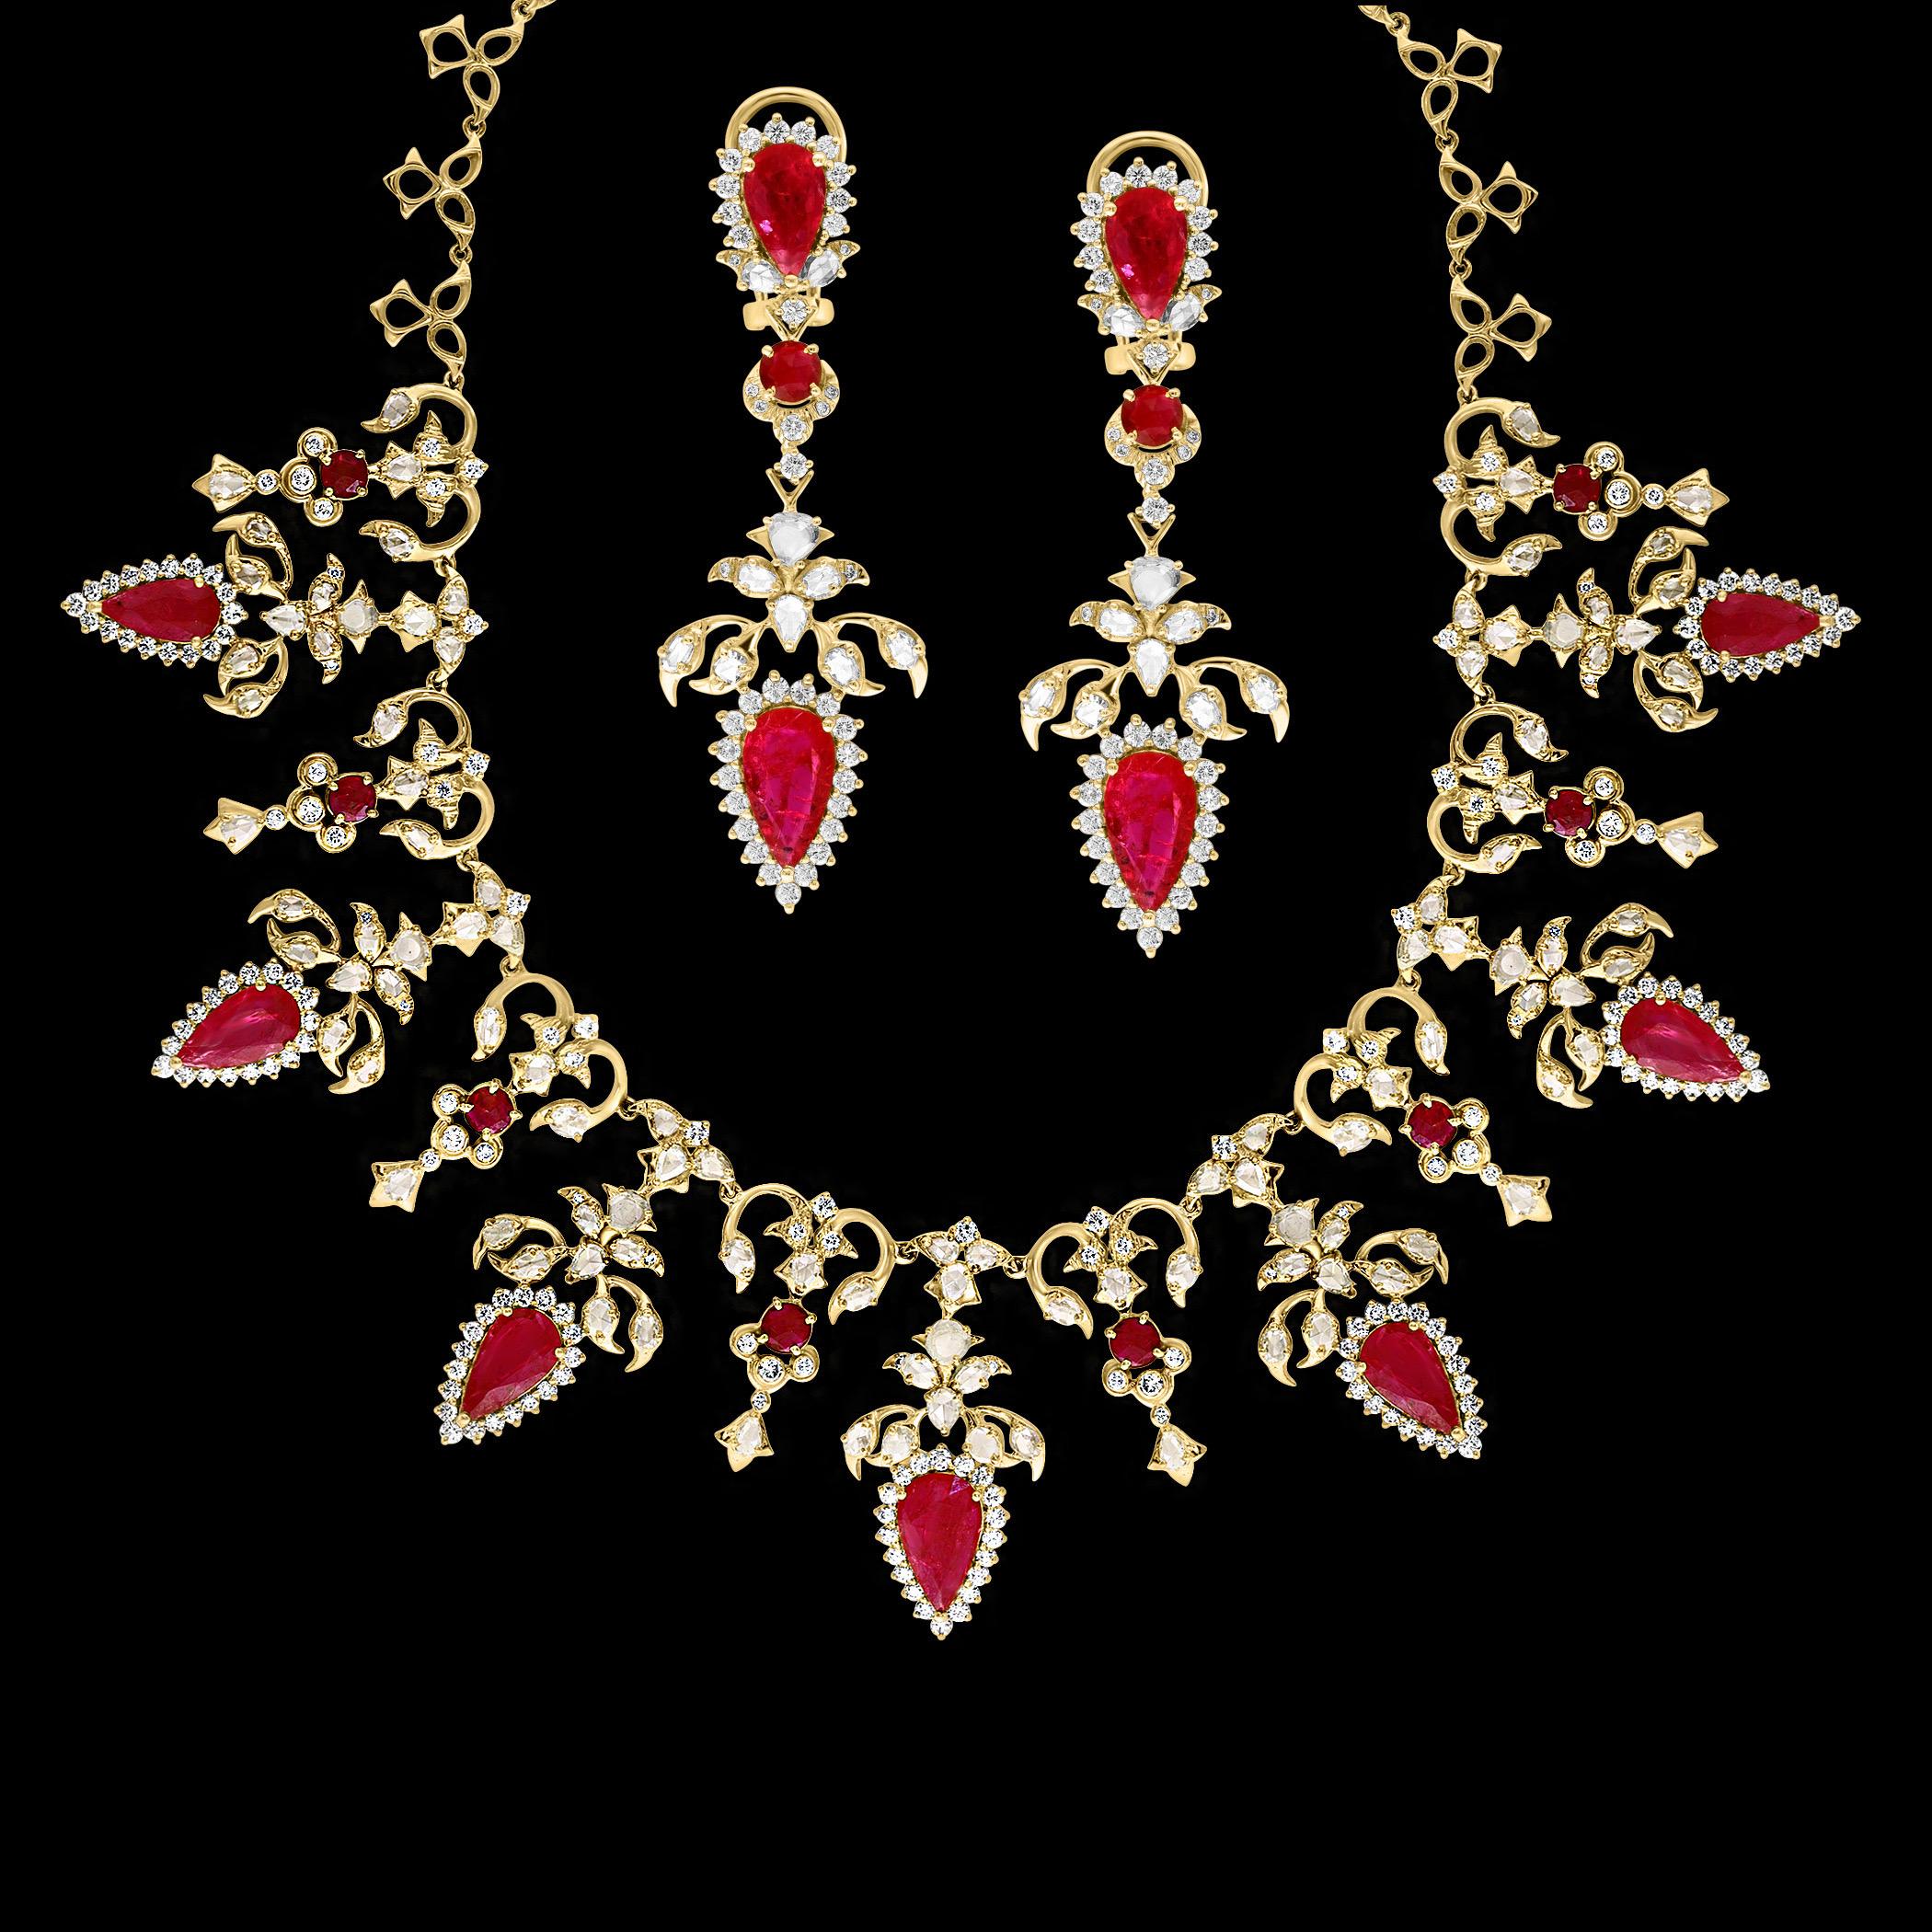 This bridal suite is crafted from 18 Karat gold and features a necklace adorned with 7 large Pear-shaped natural Rubies, totaling 45 carats, along with 22 carats of Rose-cut Diamonds and round brilliant-cut Diamonds. The diamonds boast a Clarity of